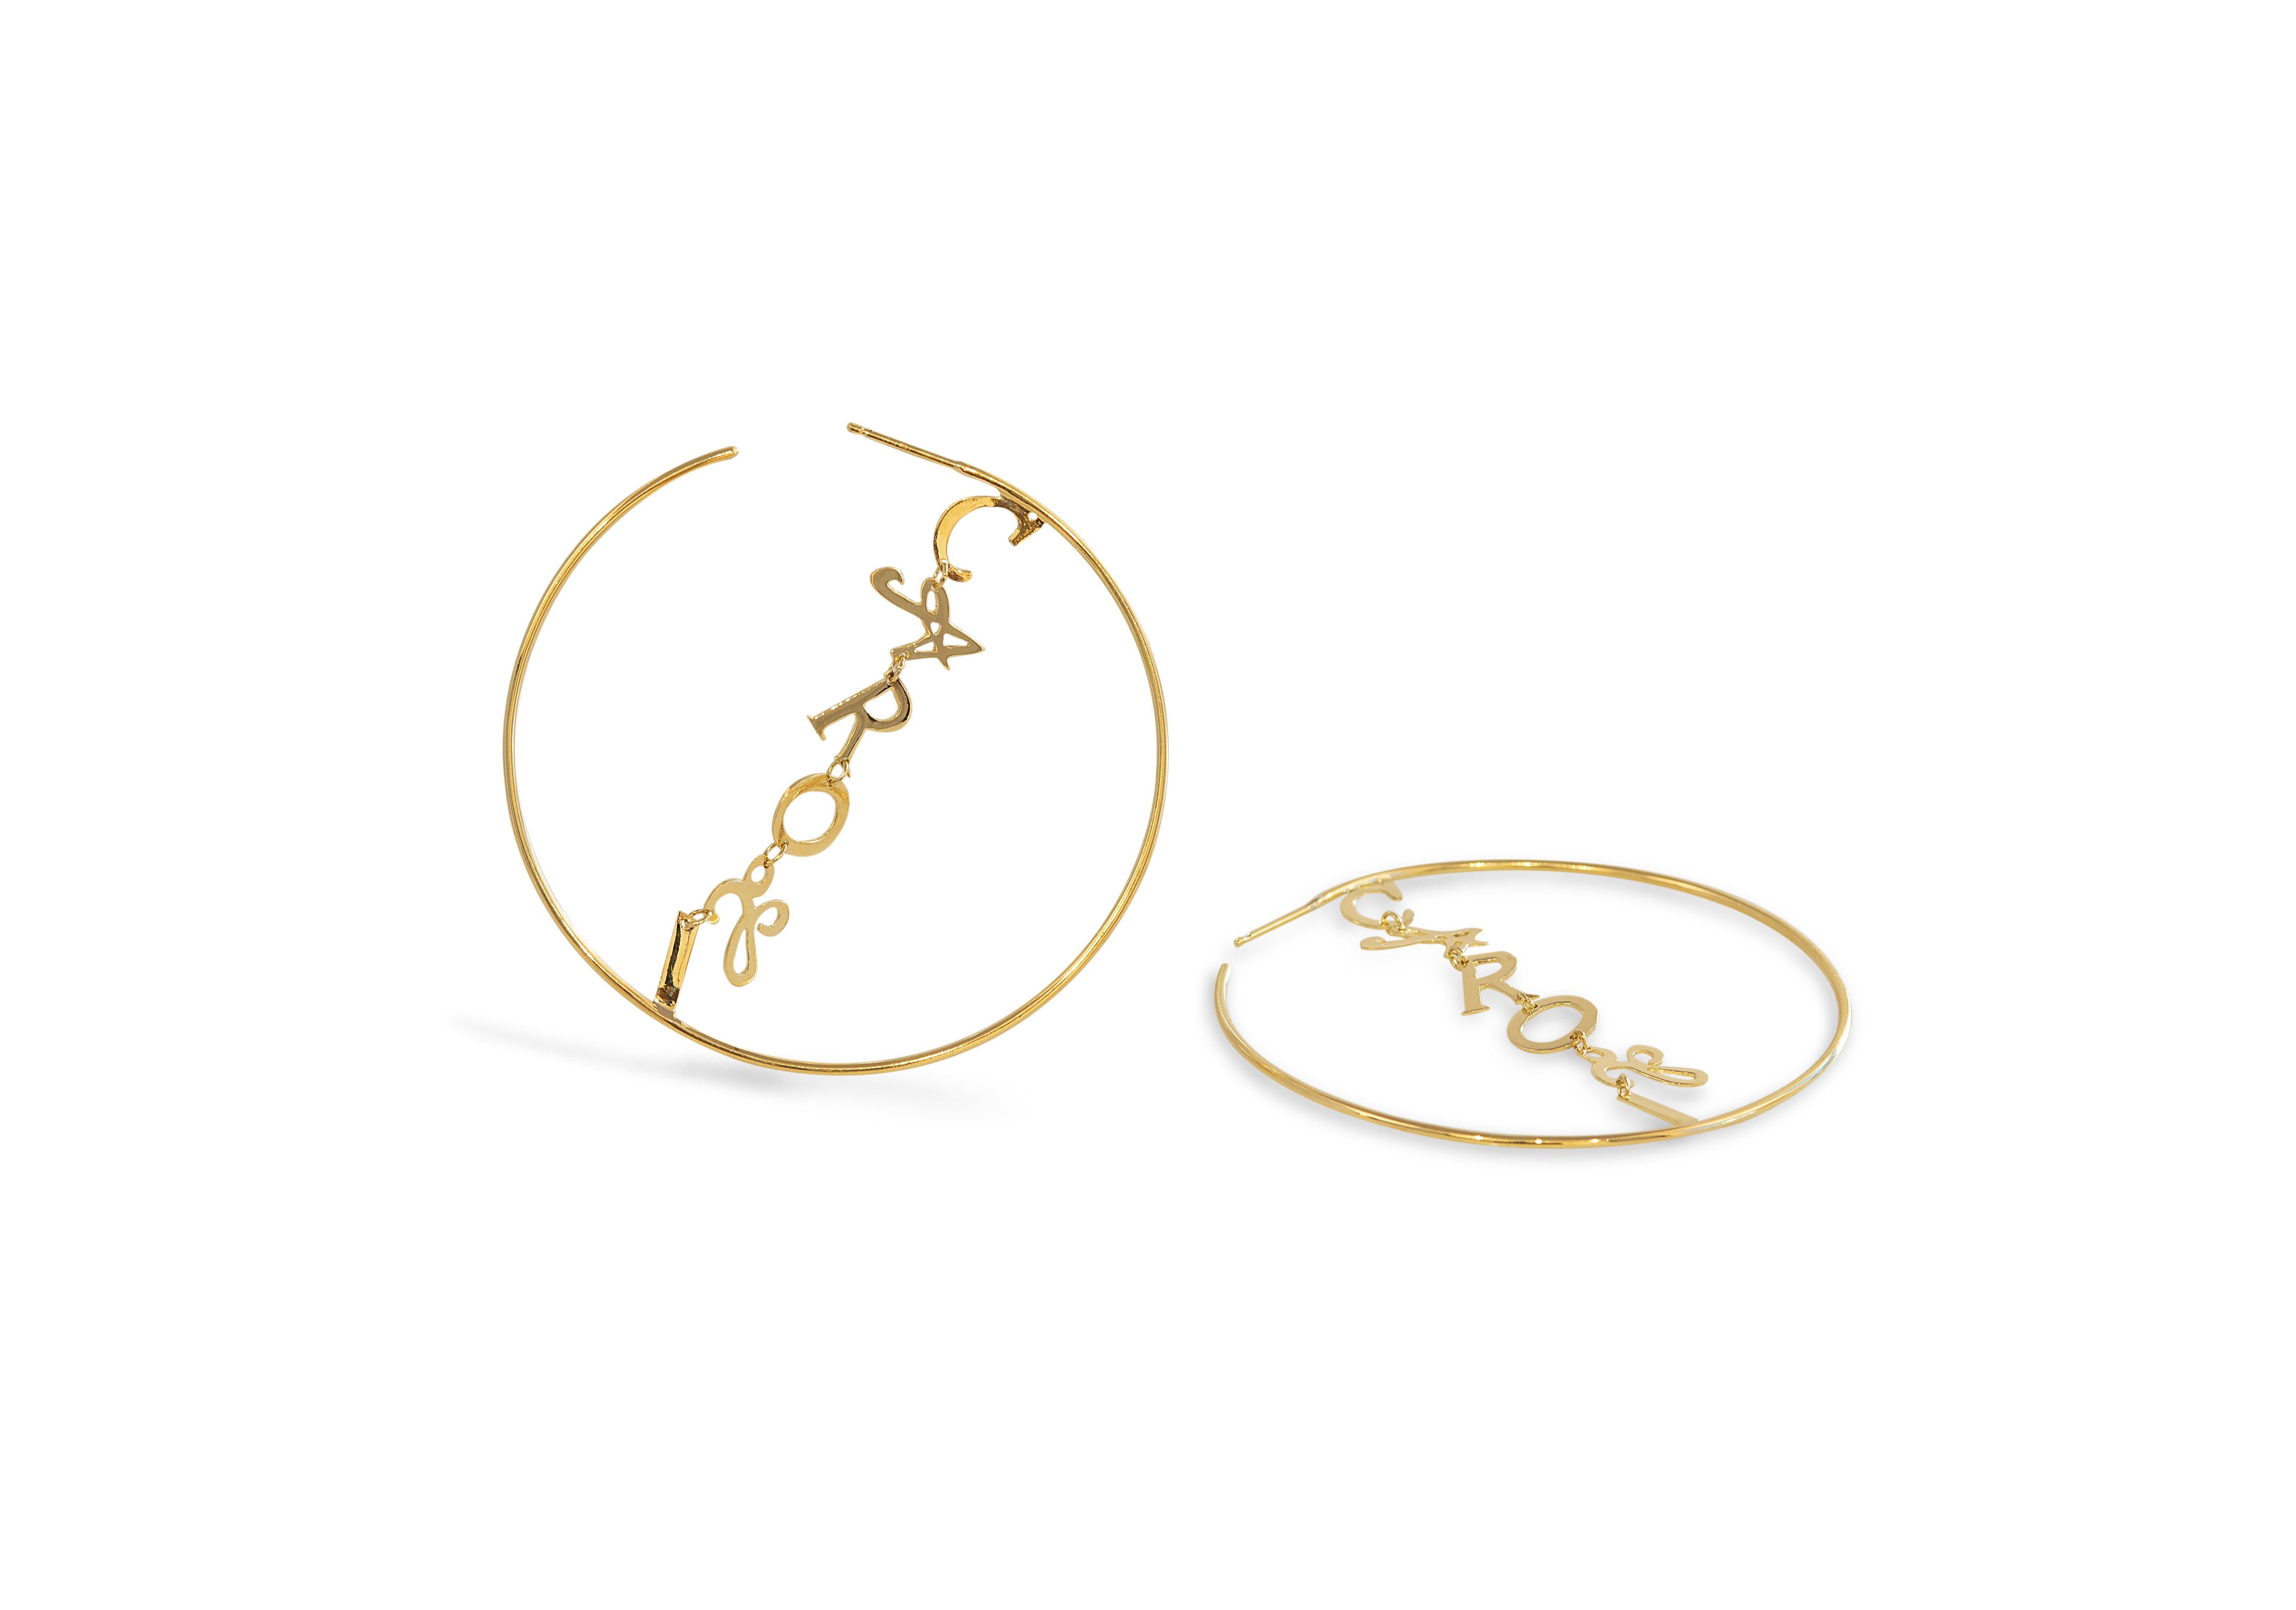 Personalize 18K Yellow Gold Bespoke Hoops Contemporary Letter Design Earrings For Sale 2